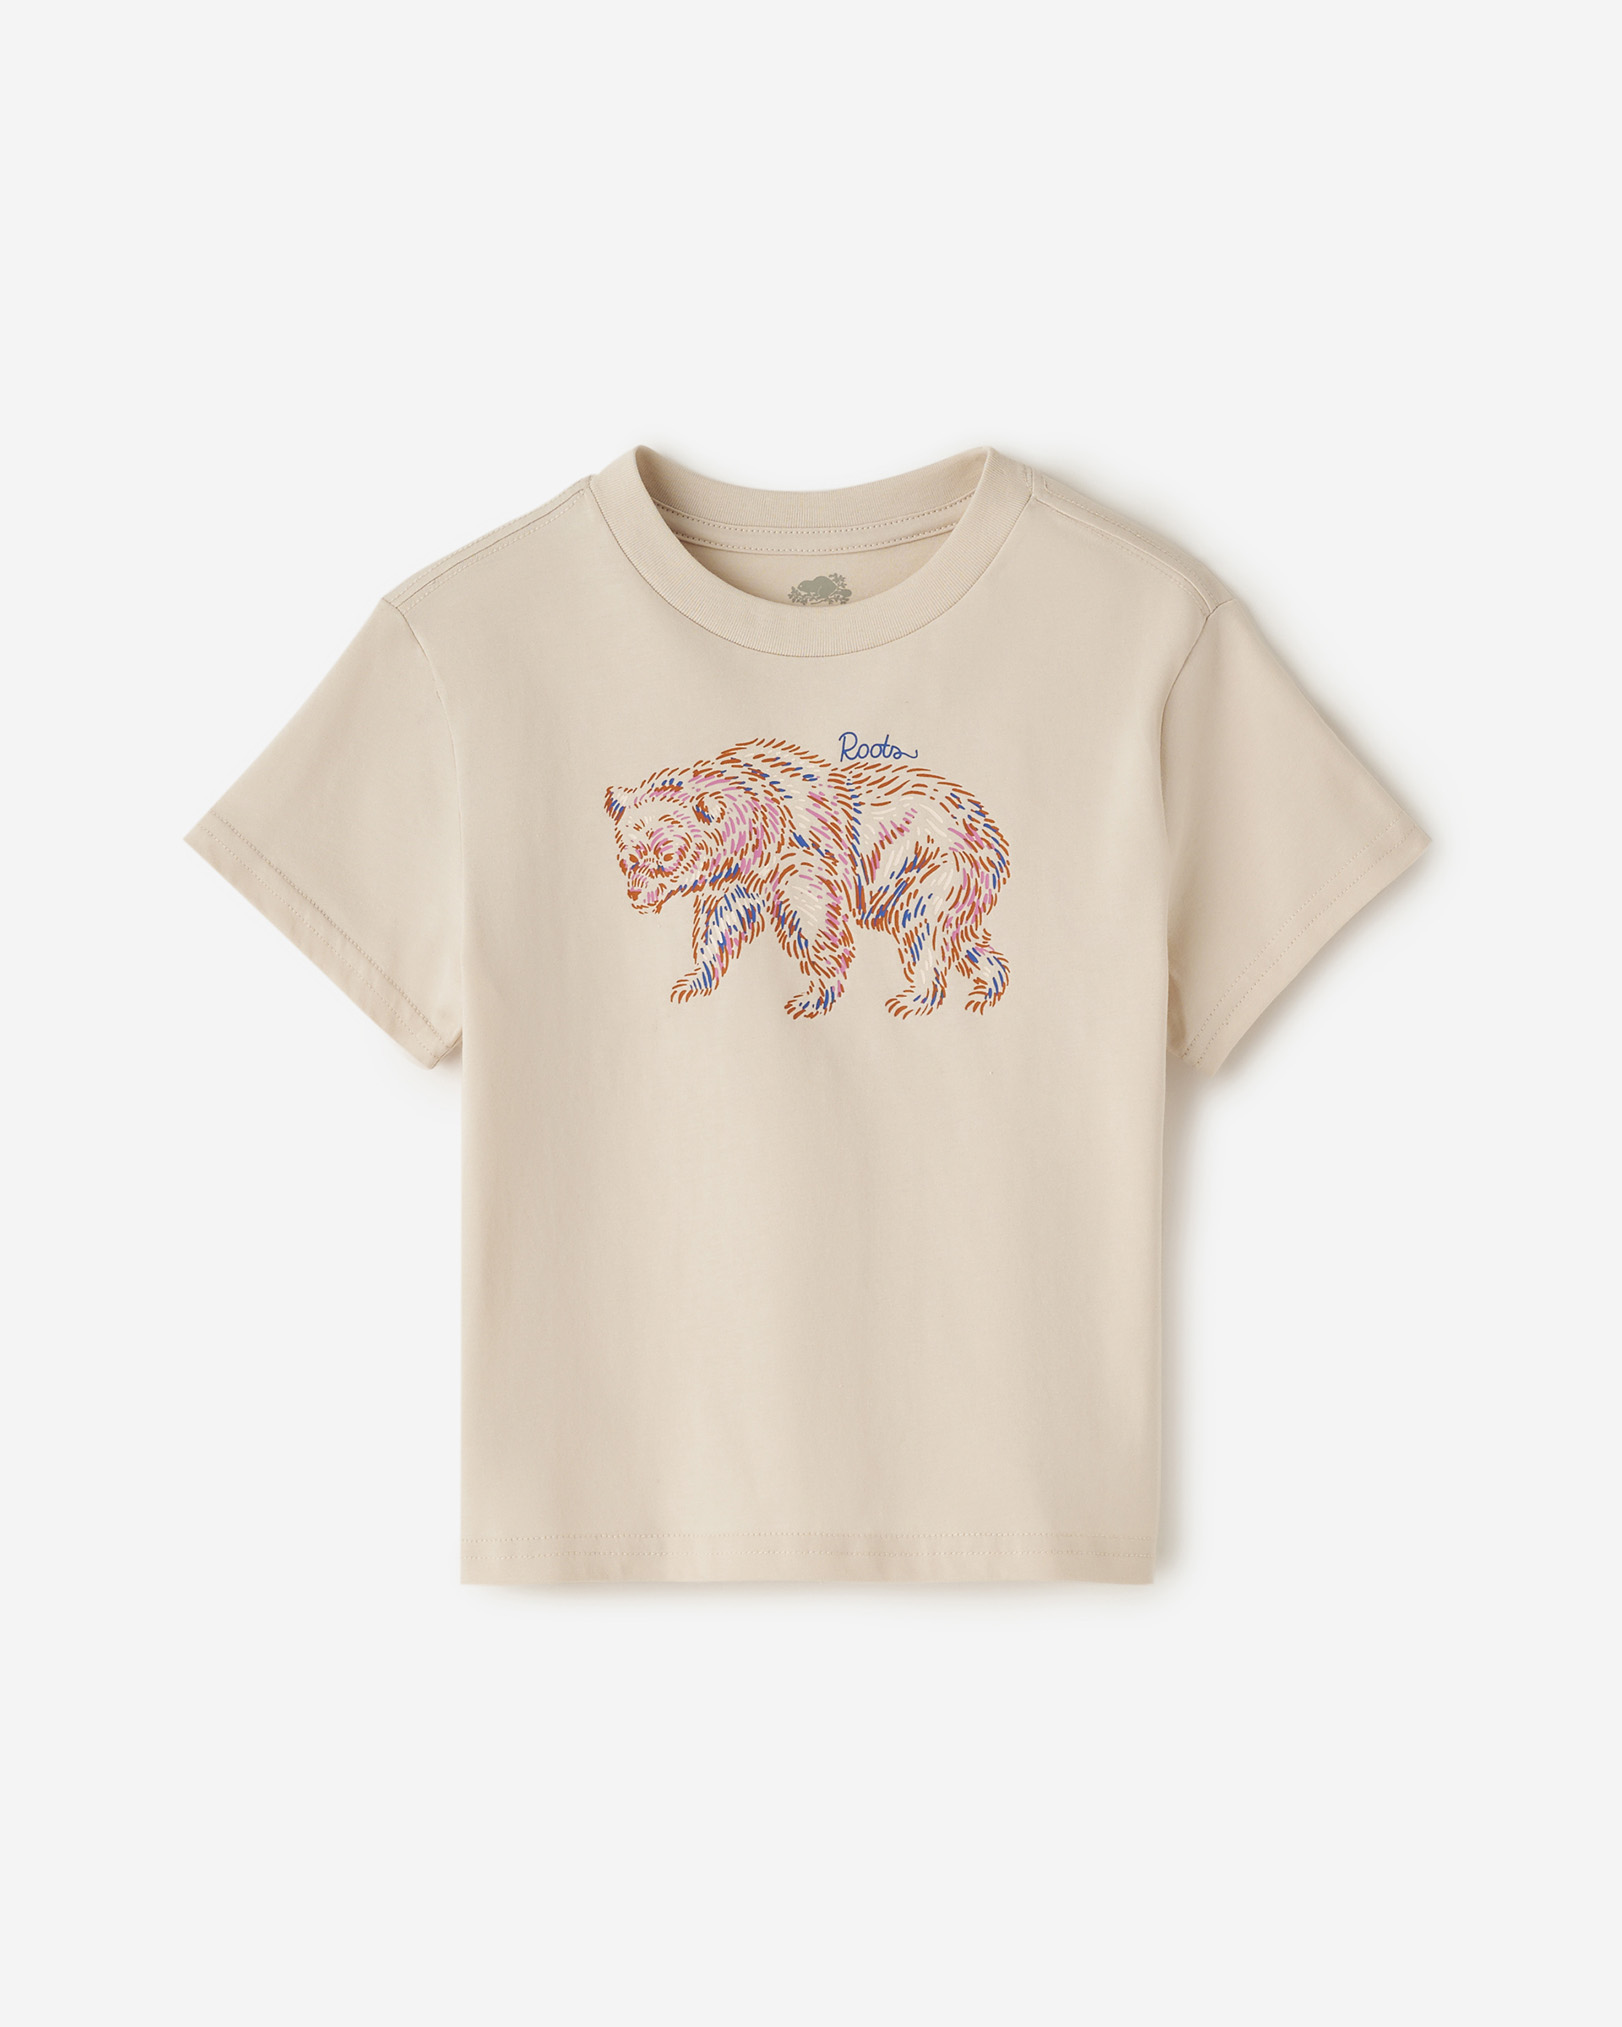 Roots Toddler Animal Graphic T-Shirt in Sandstone